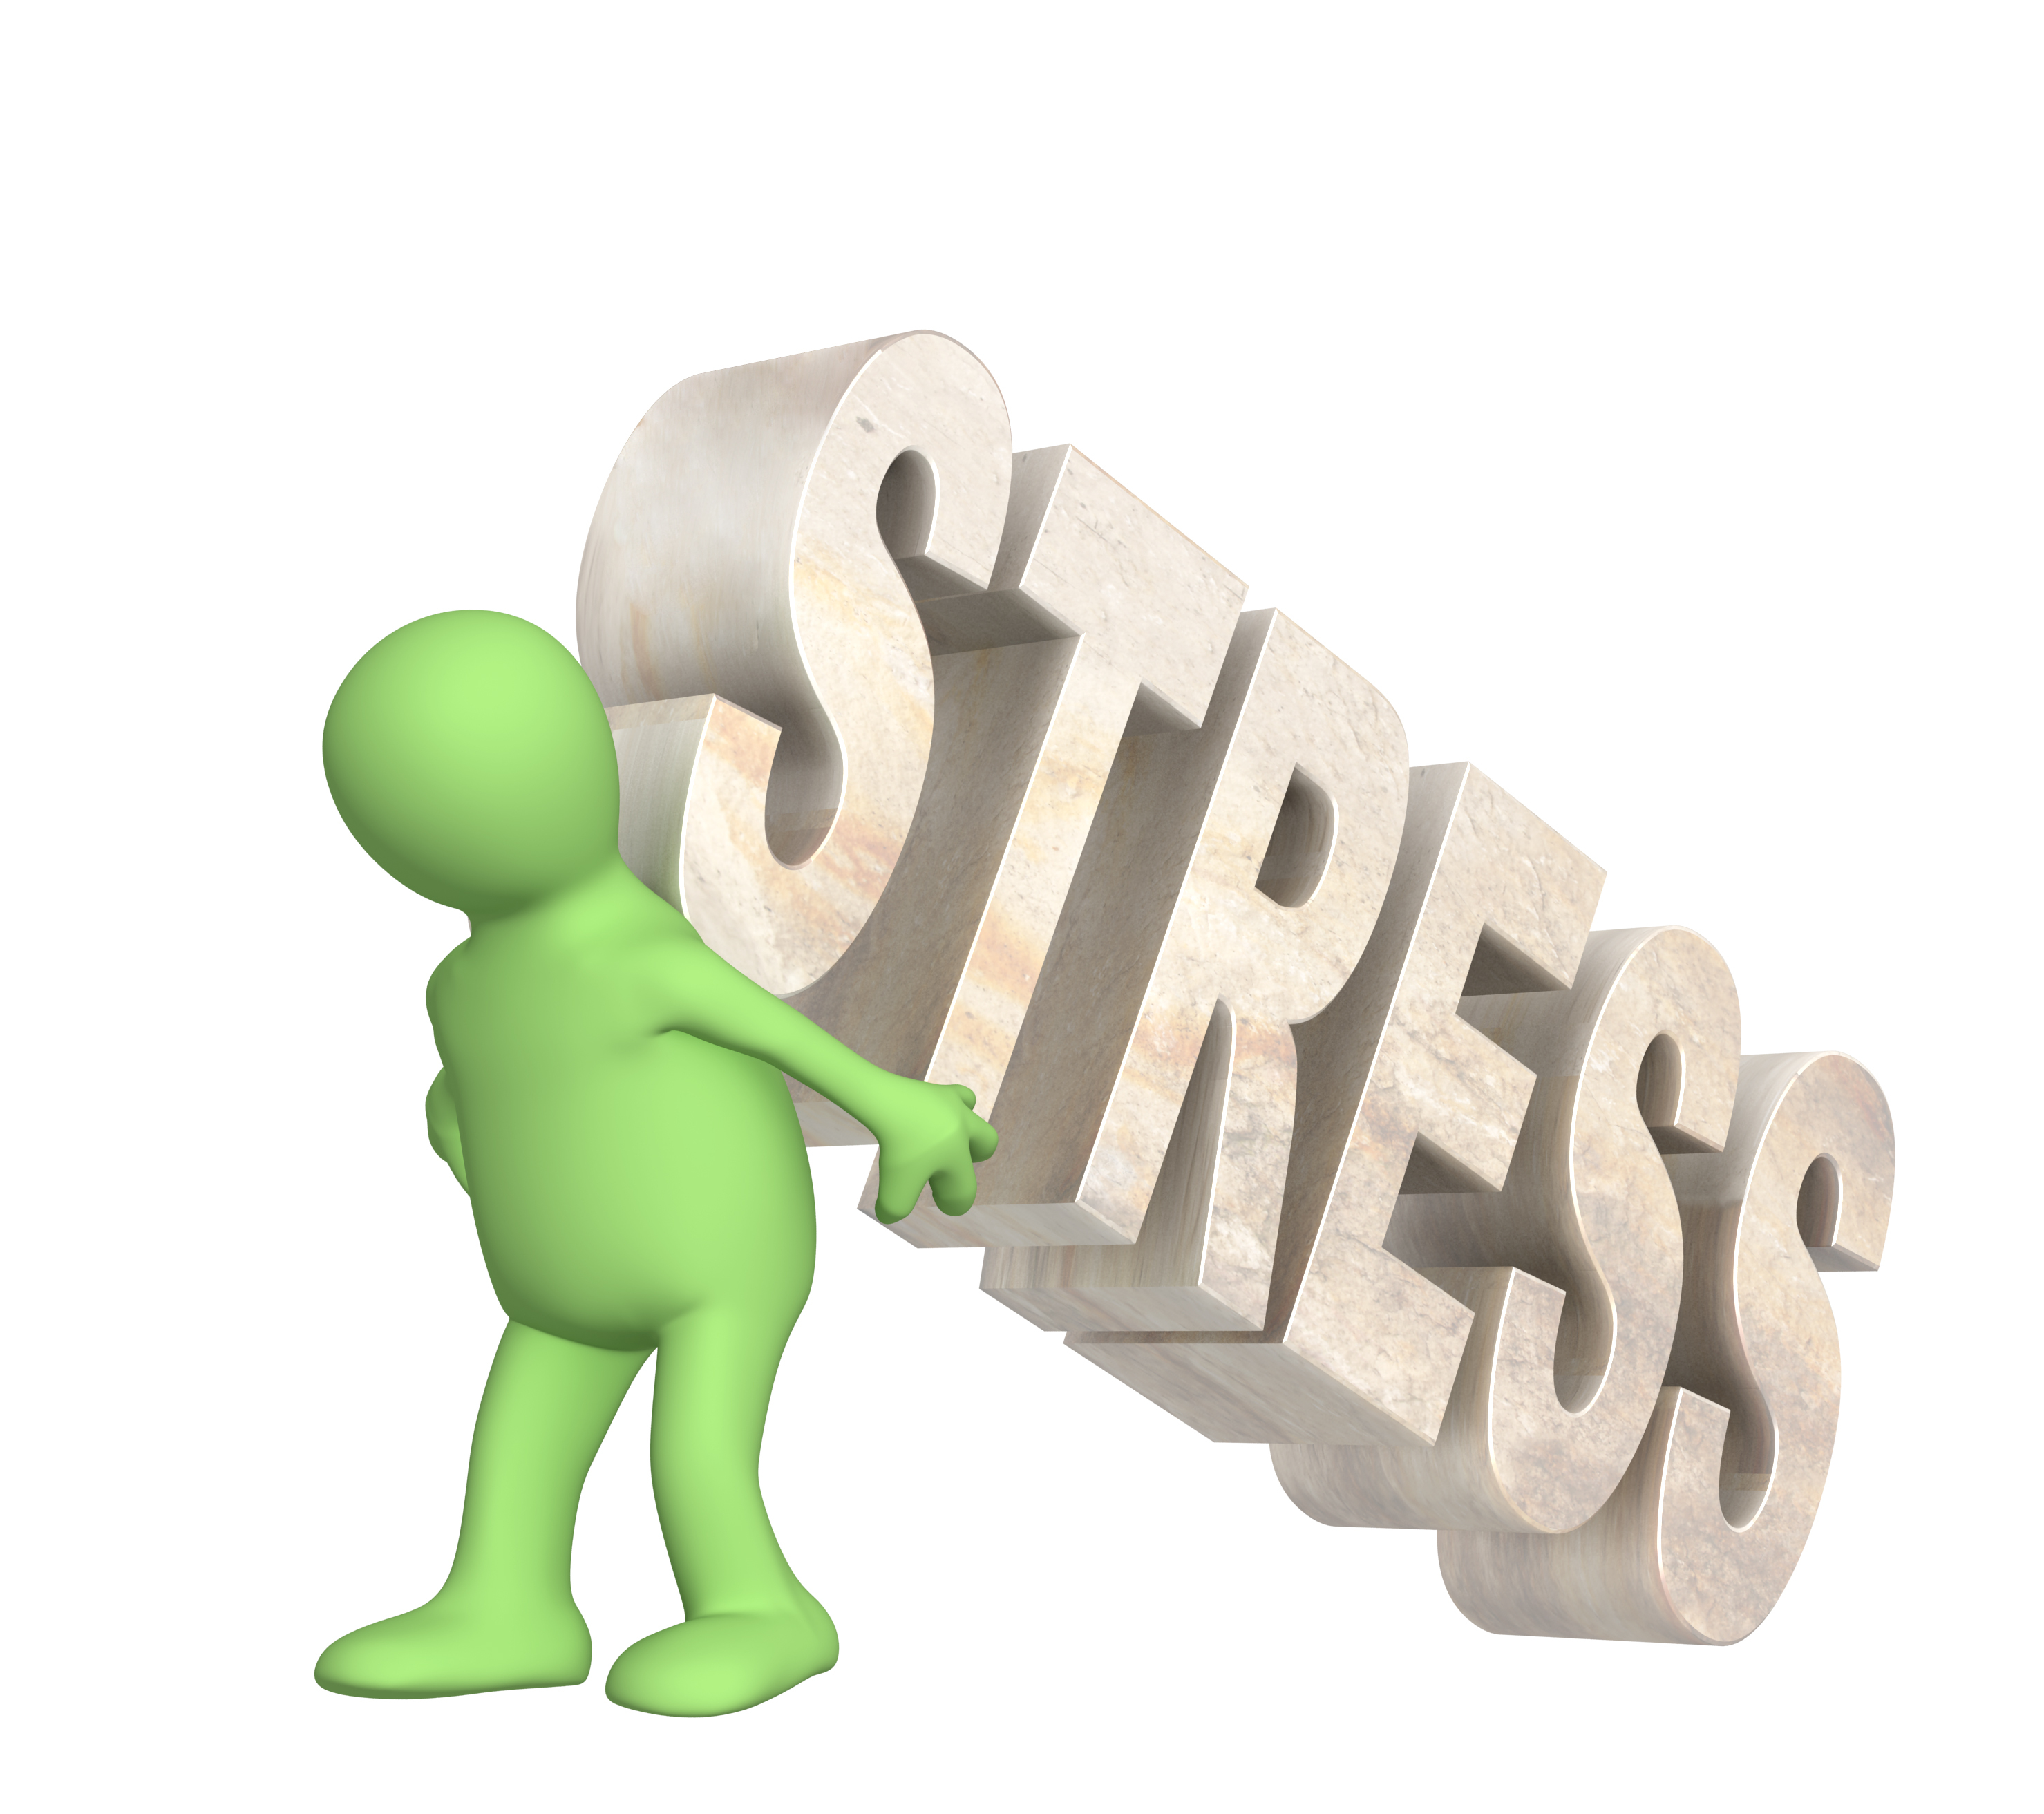 How Does Stress Make Us Ill?